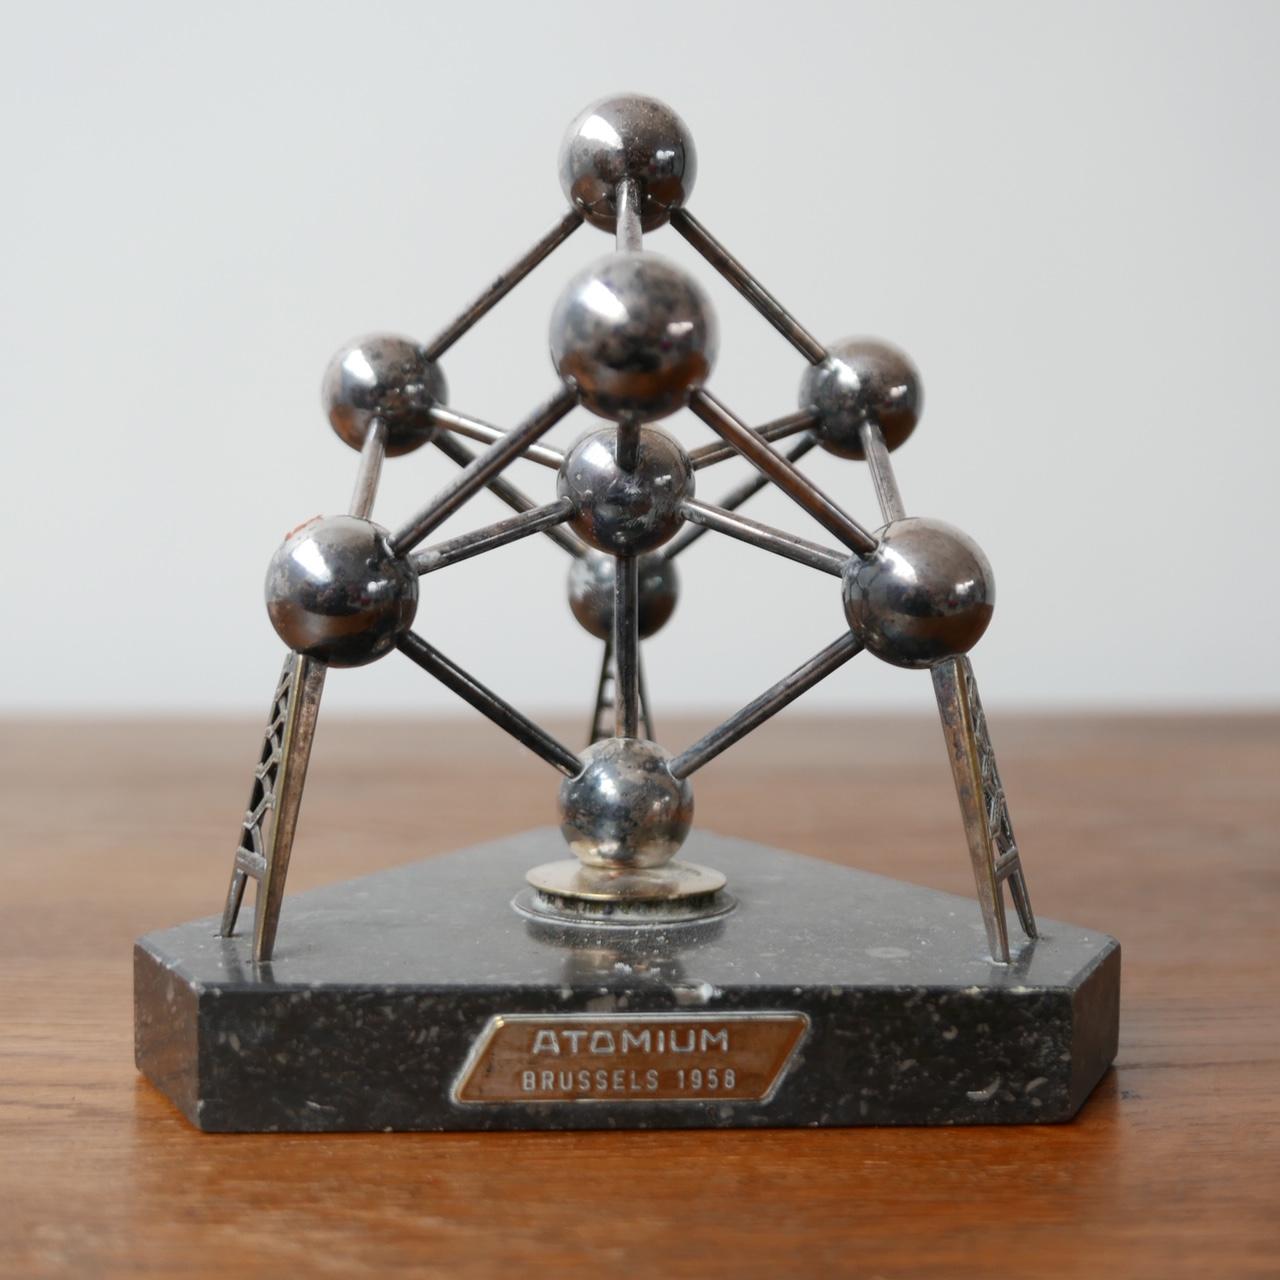 A small desk top model of the Atomium building in Brussels. 

Marble base, metal model. 

Belgium, c1960s. 

Some small nicks to the marble base, wear commensurate with age. 

Dated plaque to base. 

Location: London Gallery.